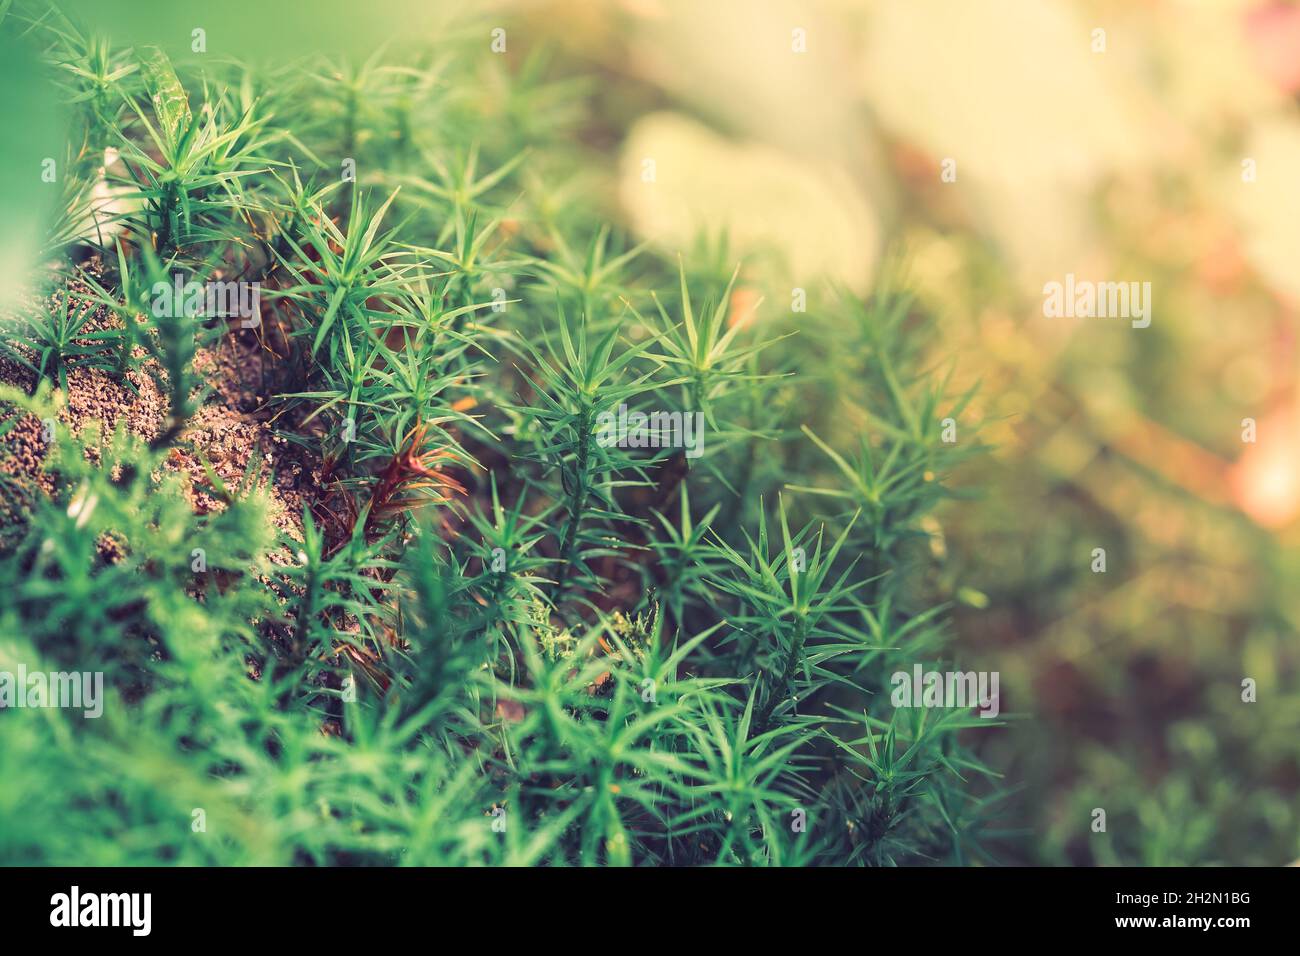 Peat Sphagnum Moss growing in the forest, natural background Stock Photo